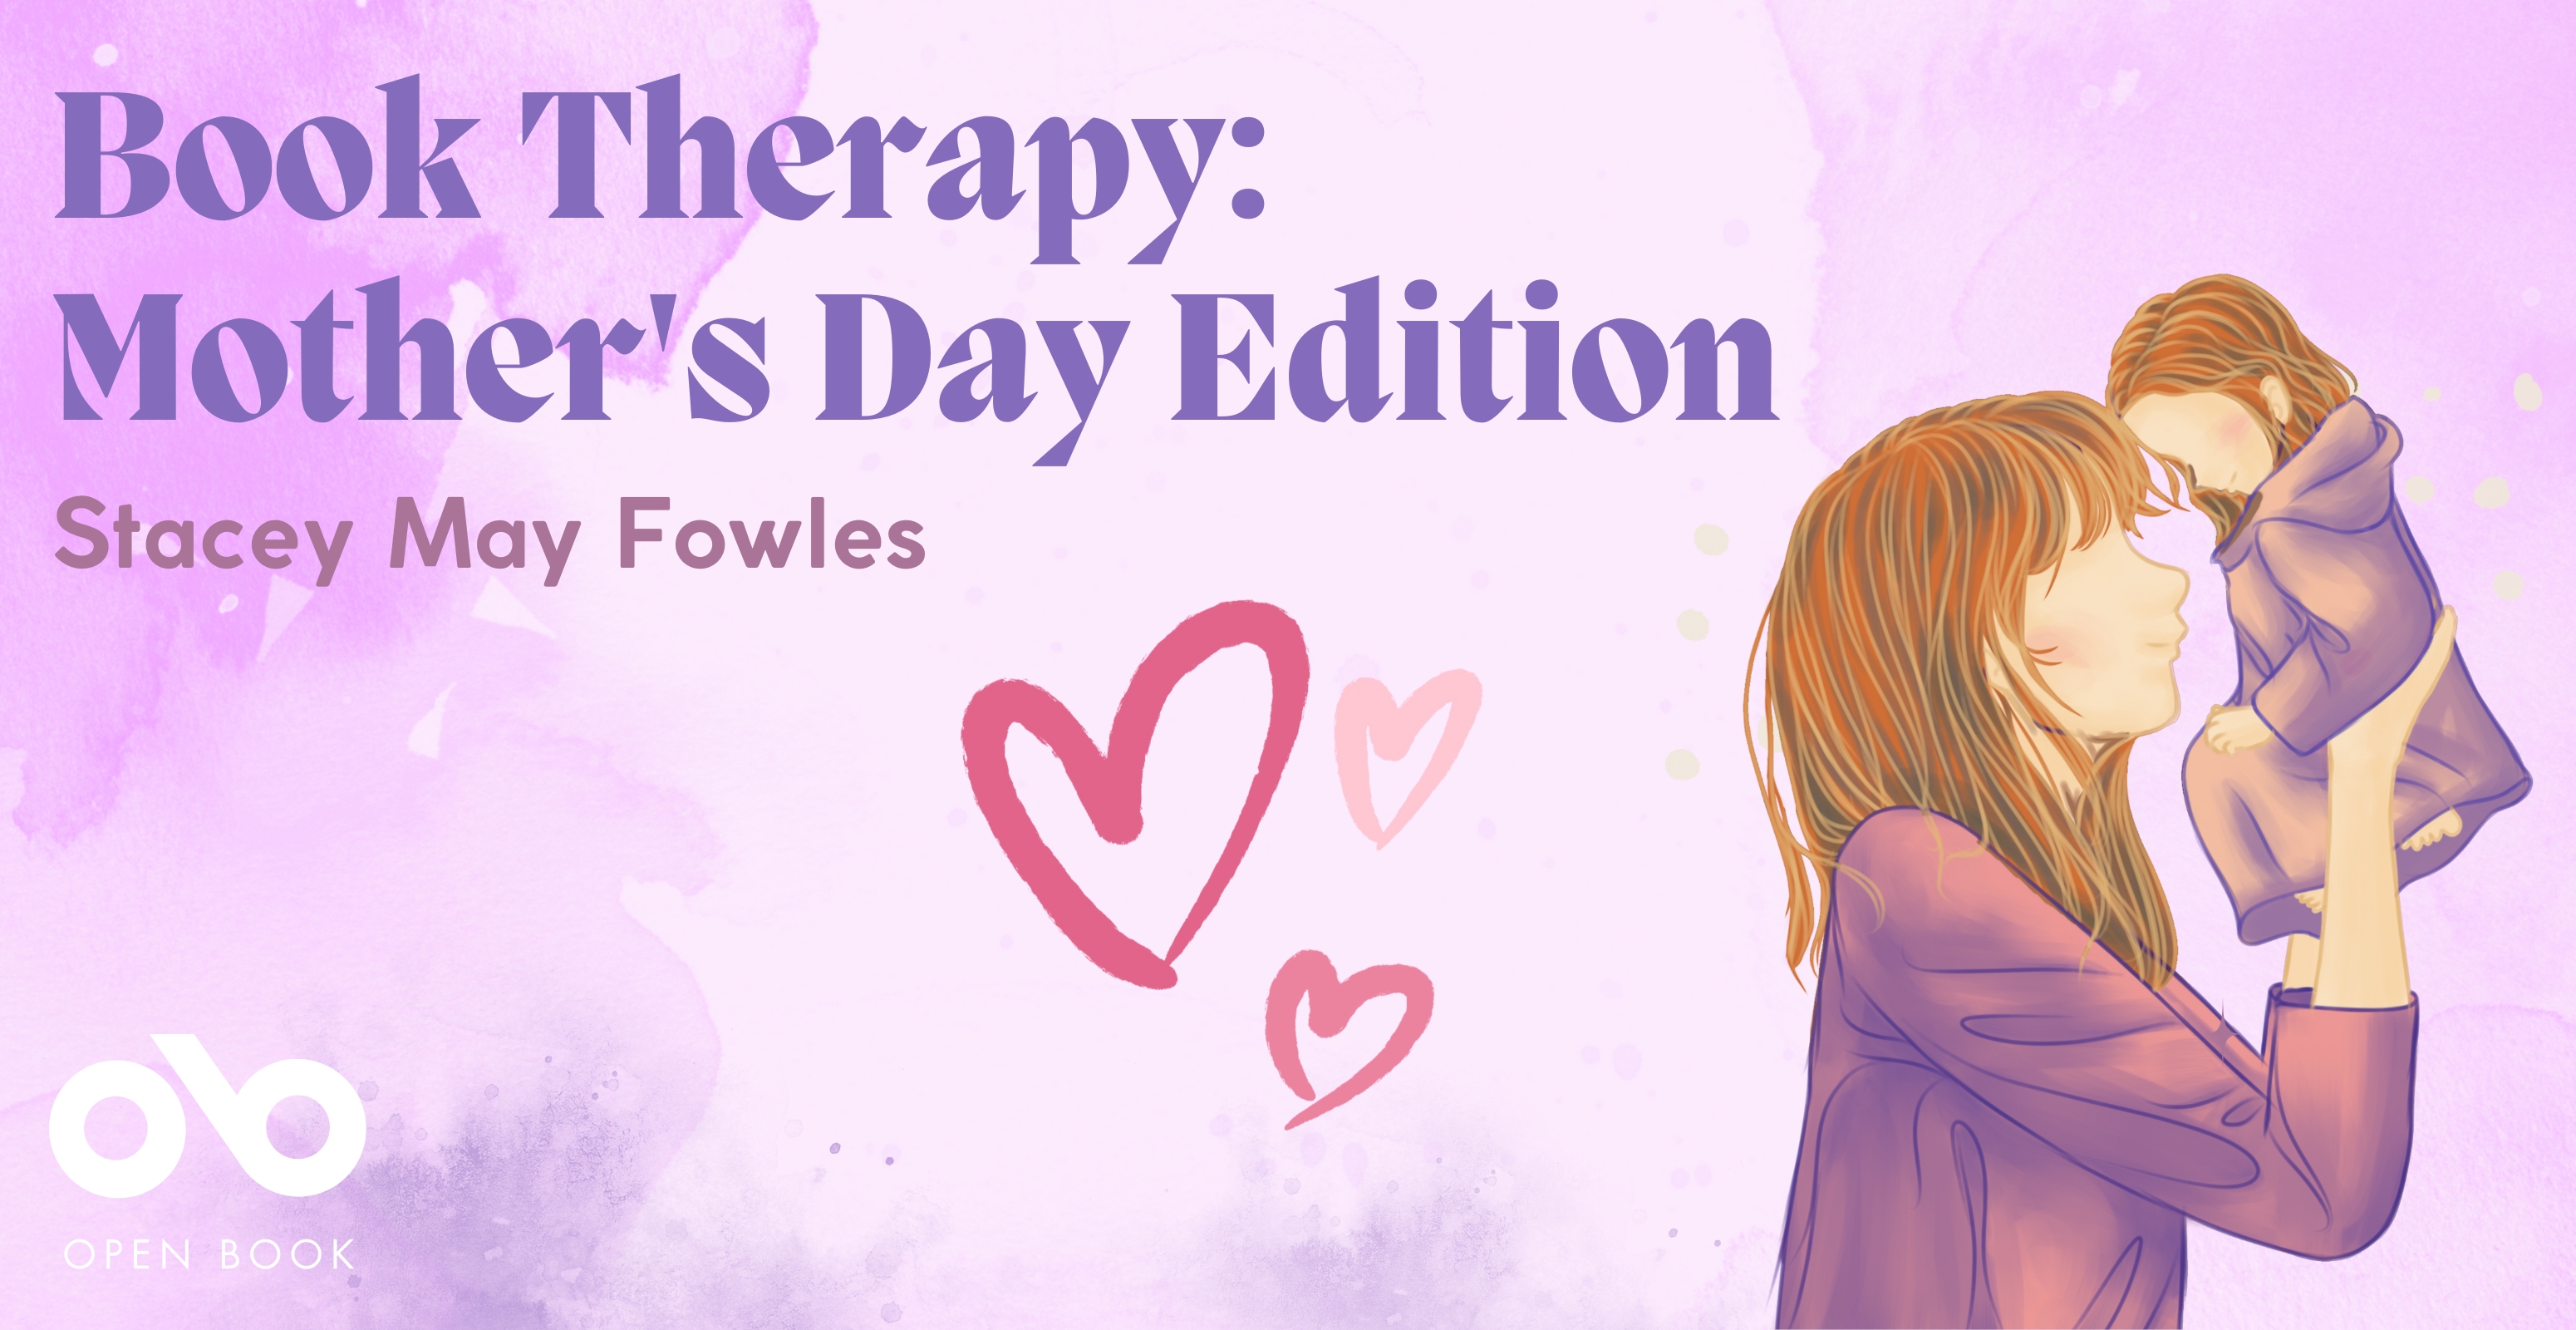 Book Therapy Mother's Day Edition (1)